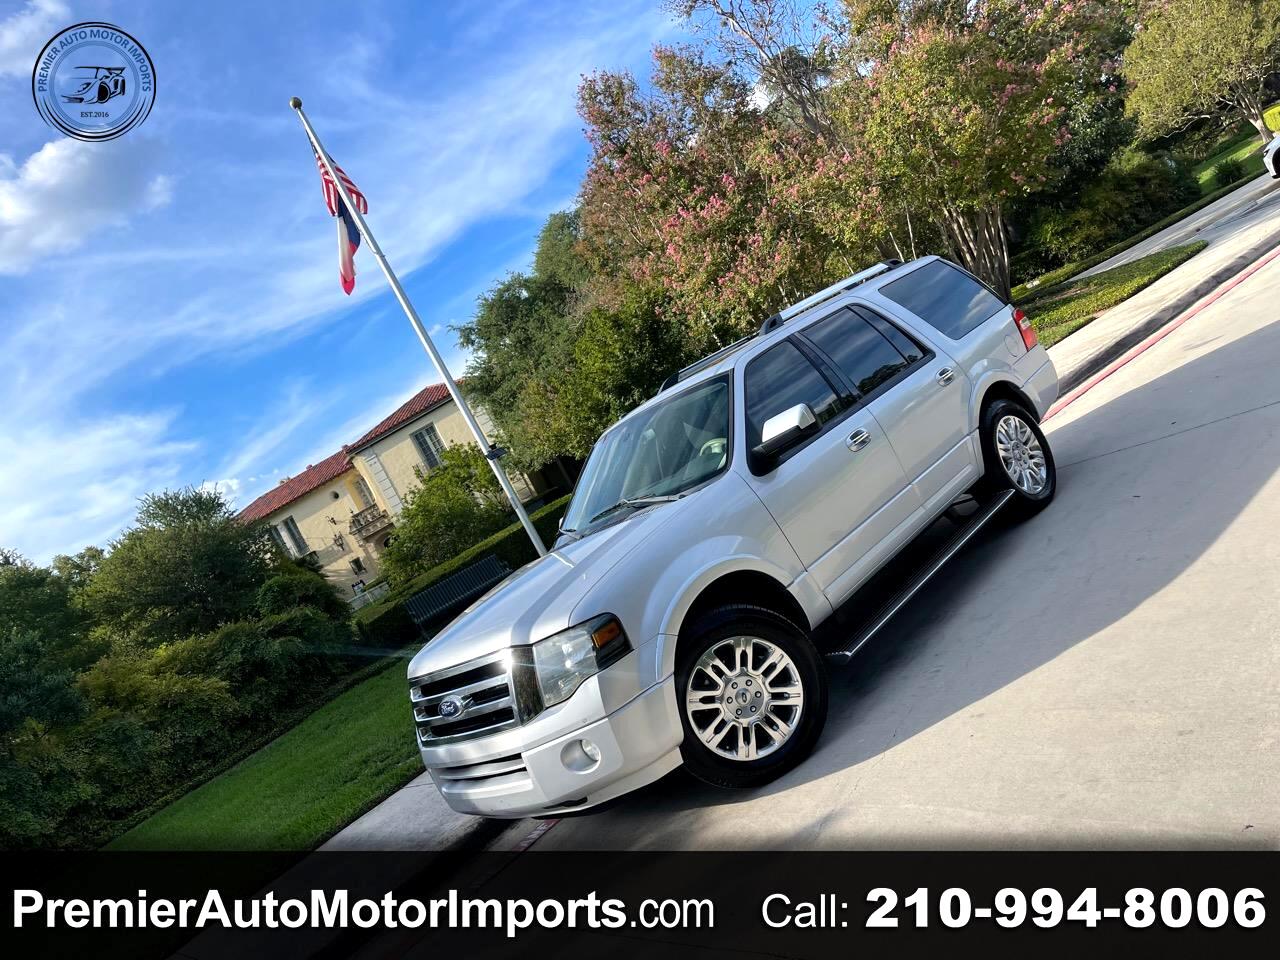 Ford Expedition Limited 2WD 2013